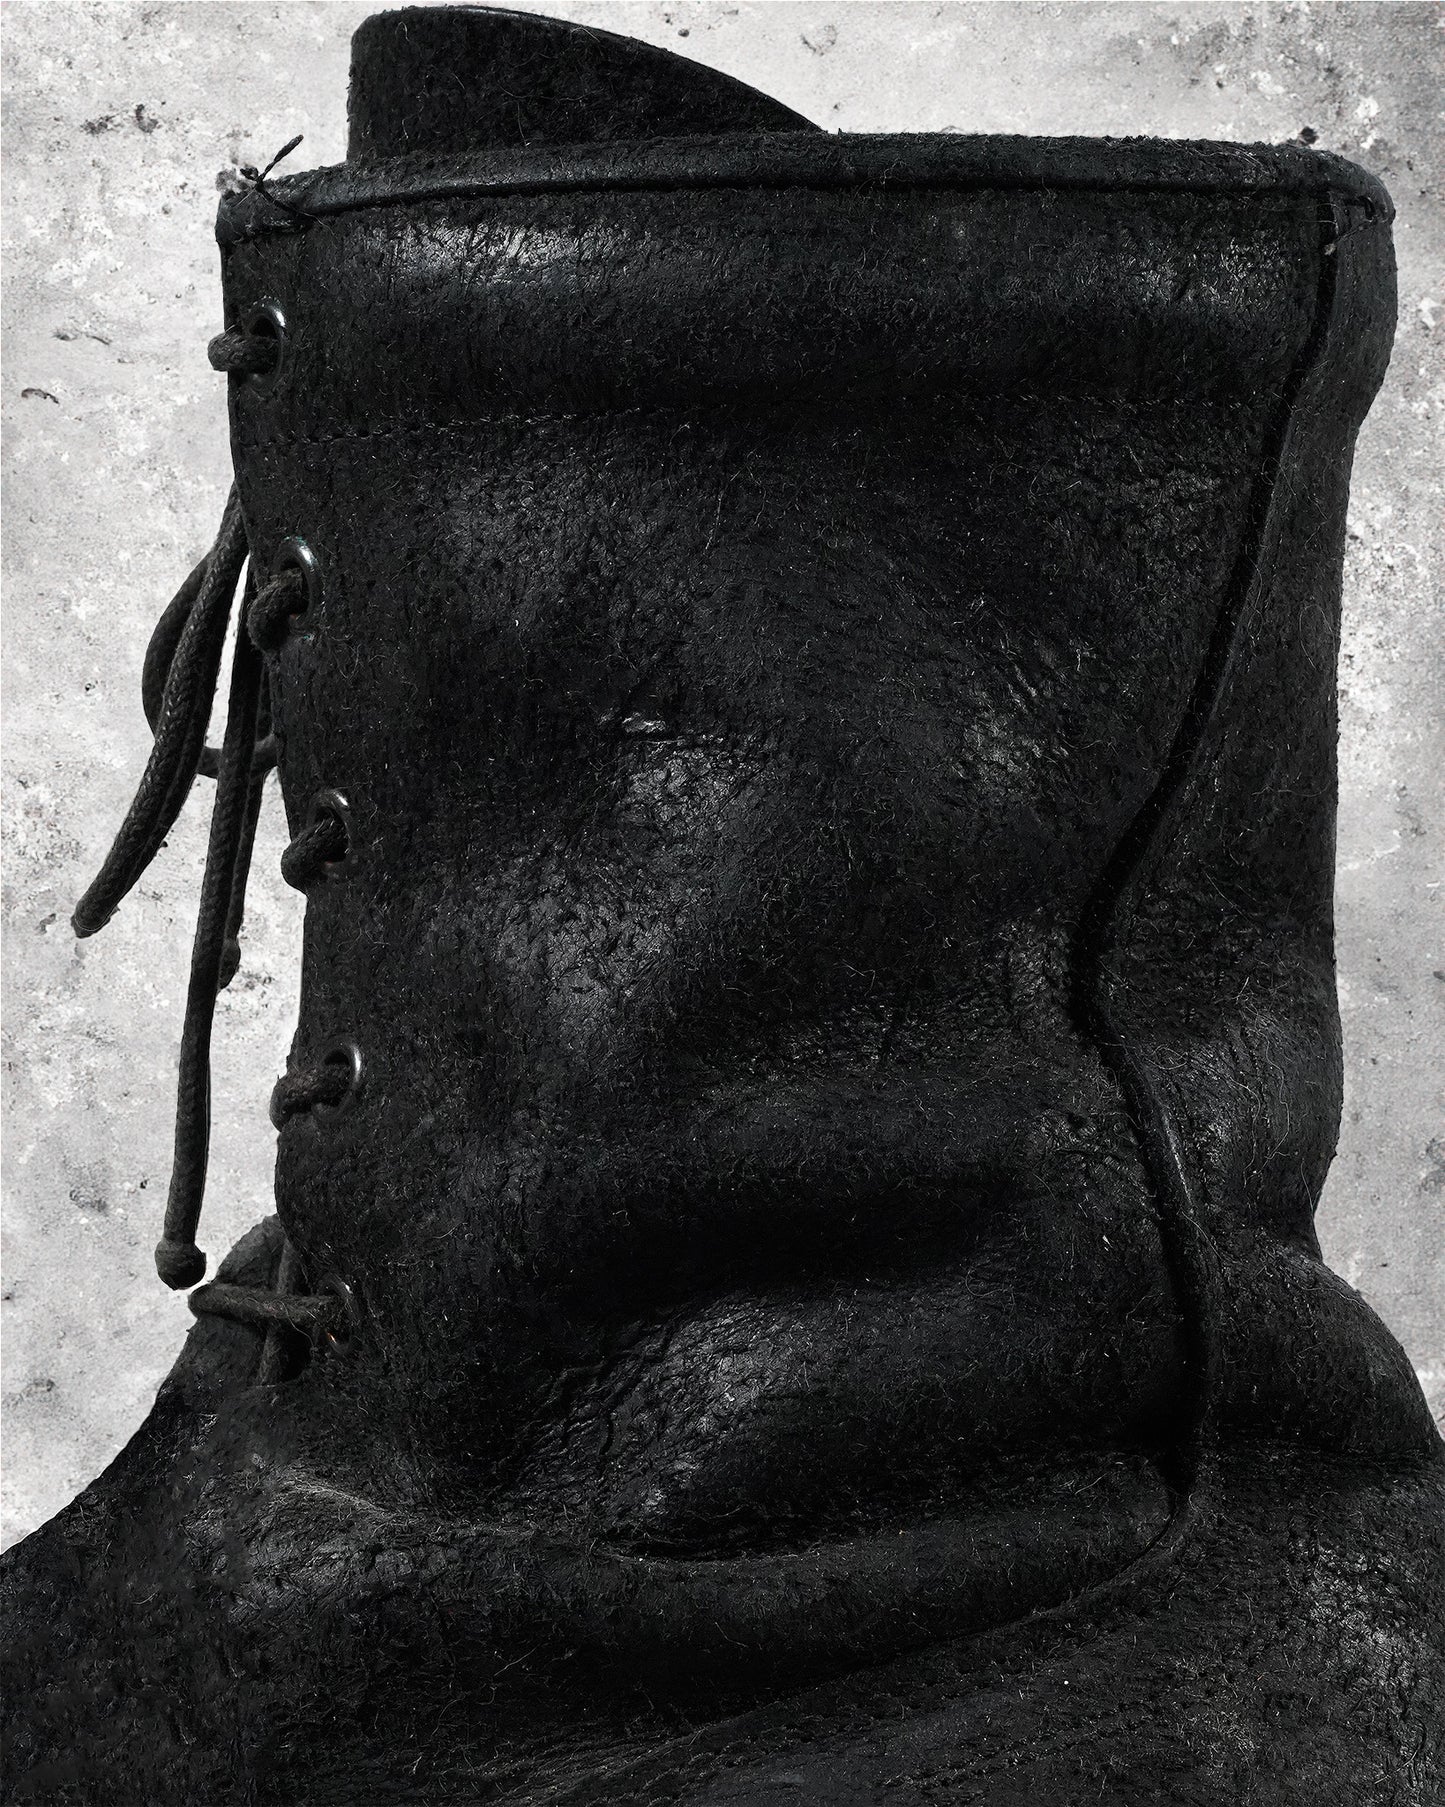 Rick Owens “Blistered” Leather Combat Boots - SS09 "Strutter"